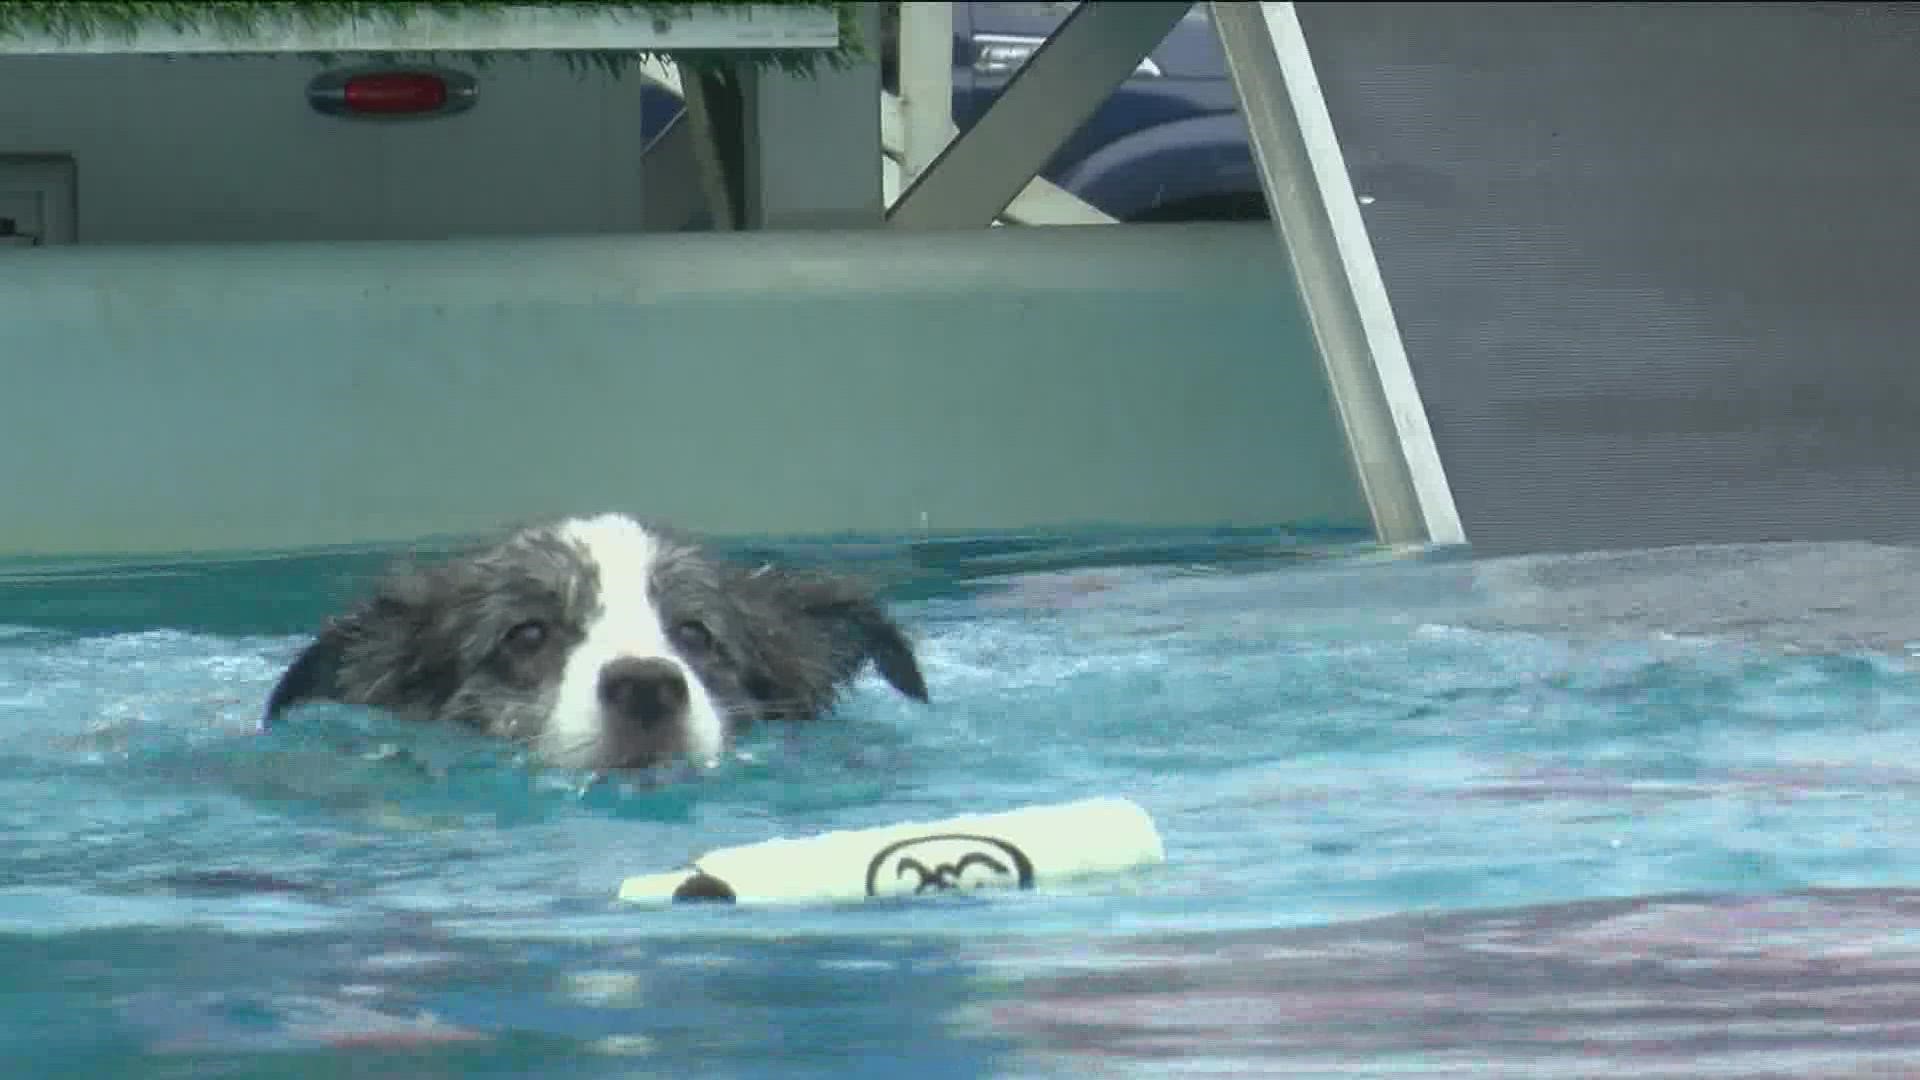 Whether they were jumping one foot into the water or 30 feet, canine competitors and their owners were having a great time bonding at the event.